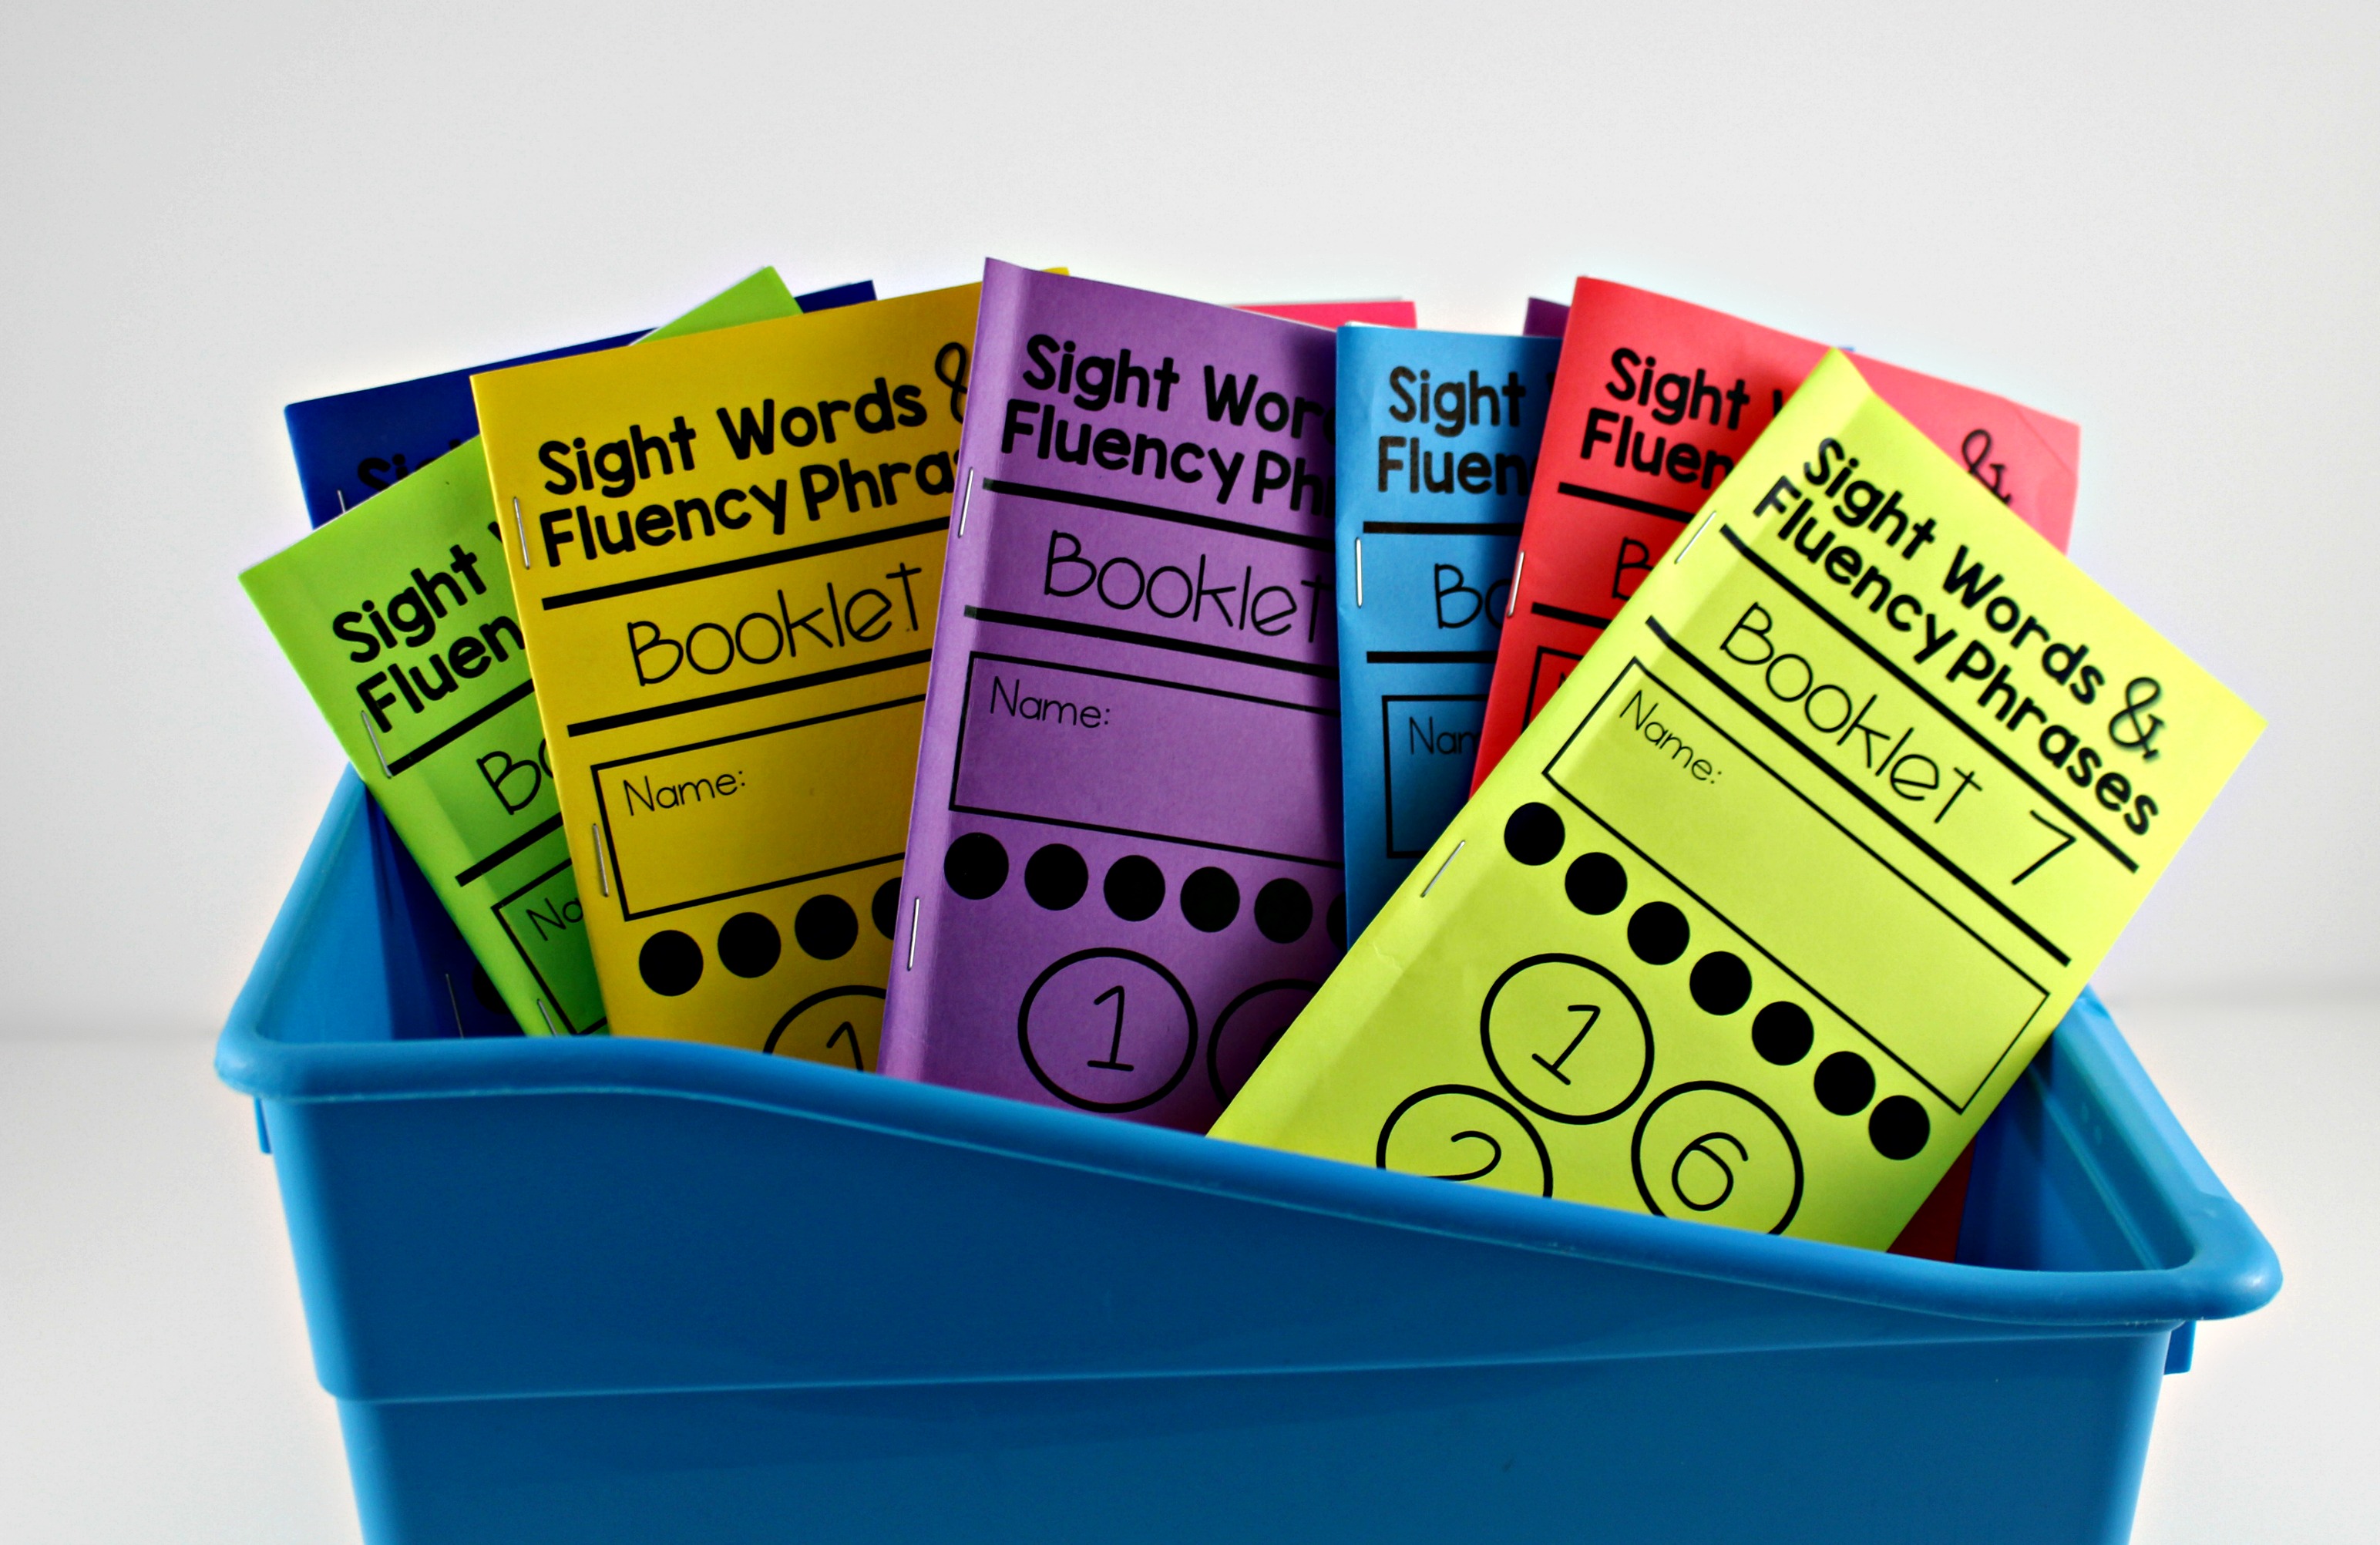 Sight Words and Fluency Phrases Booklets